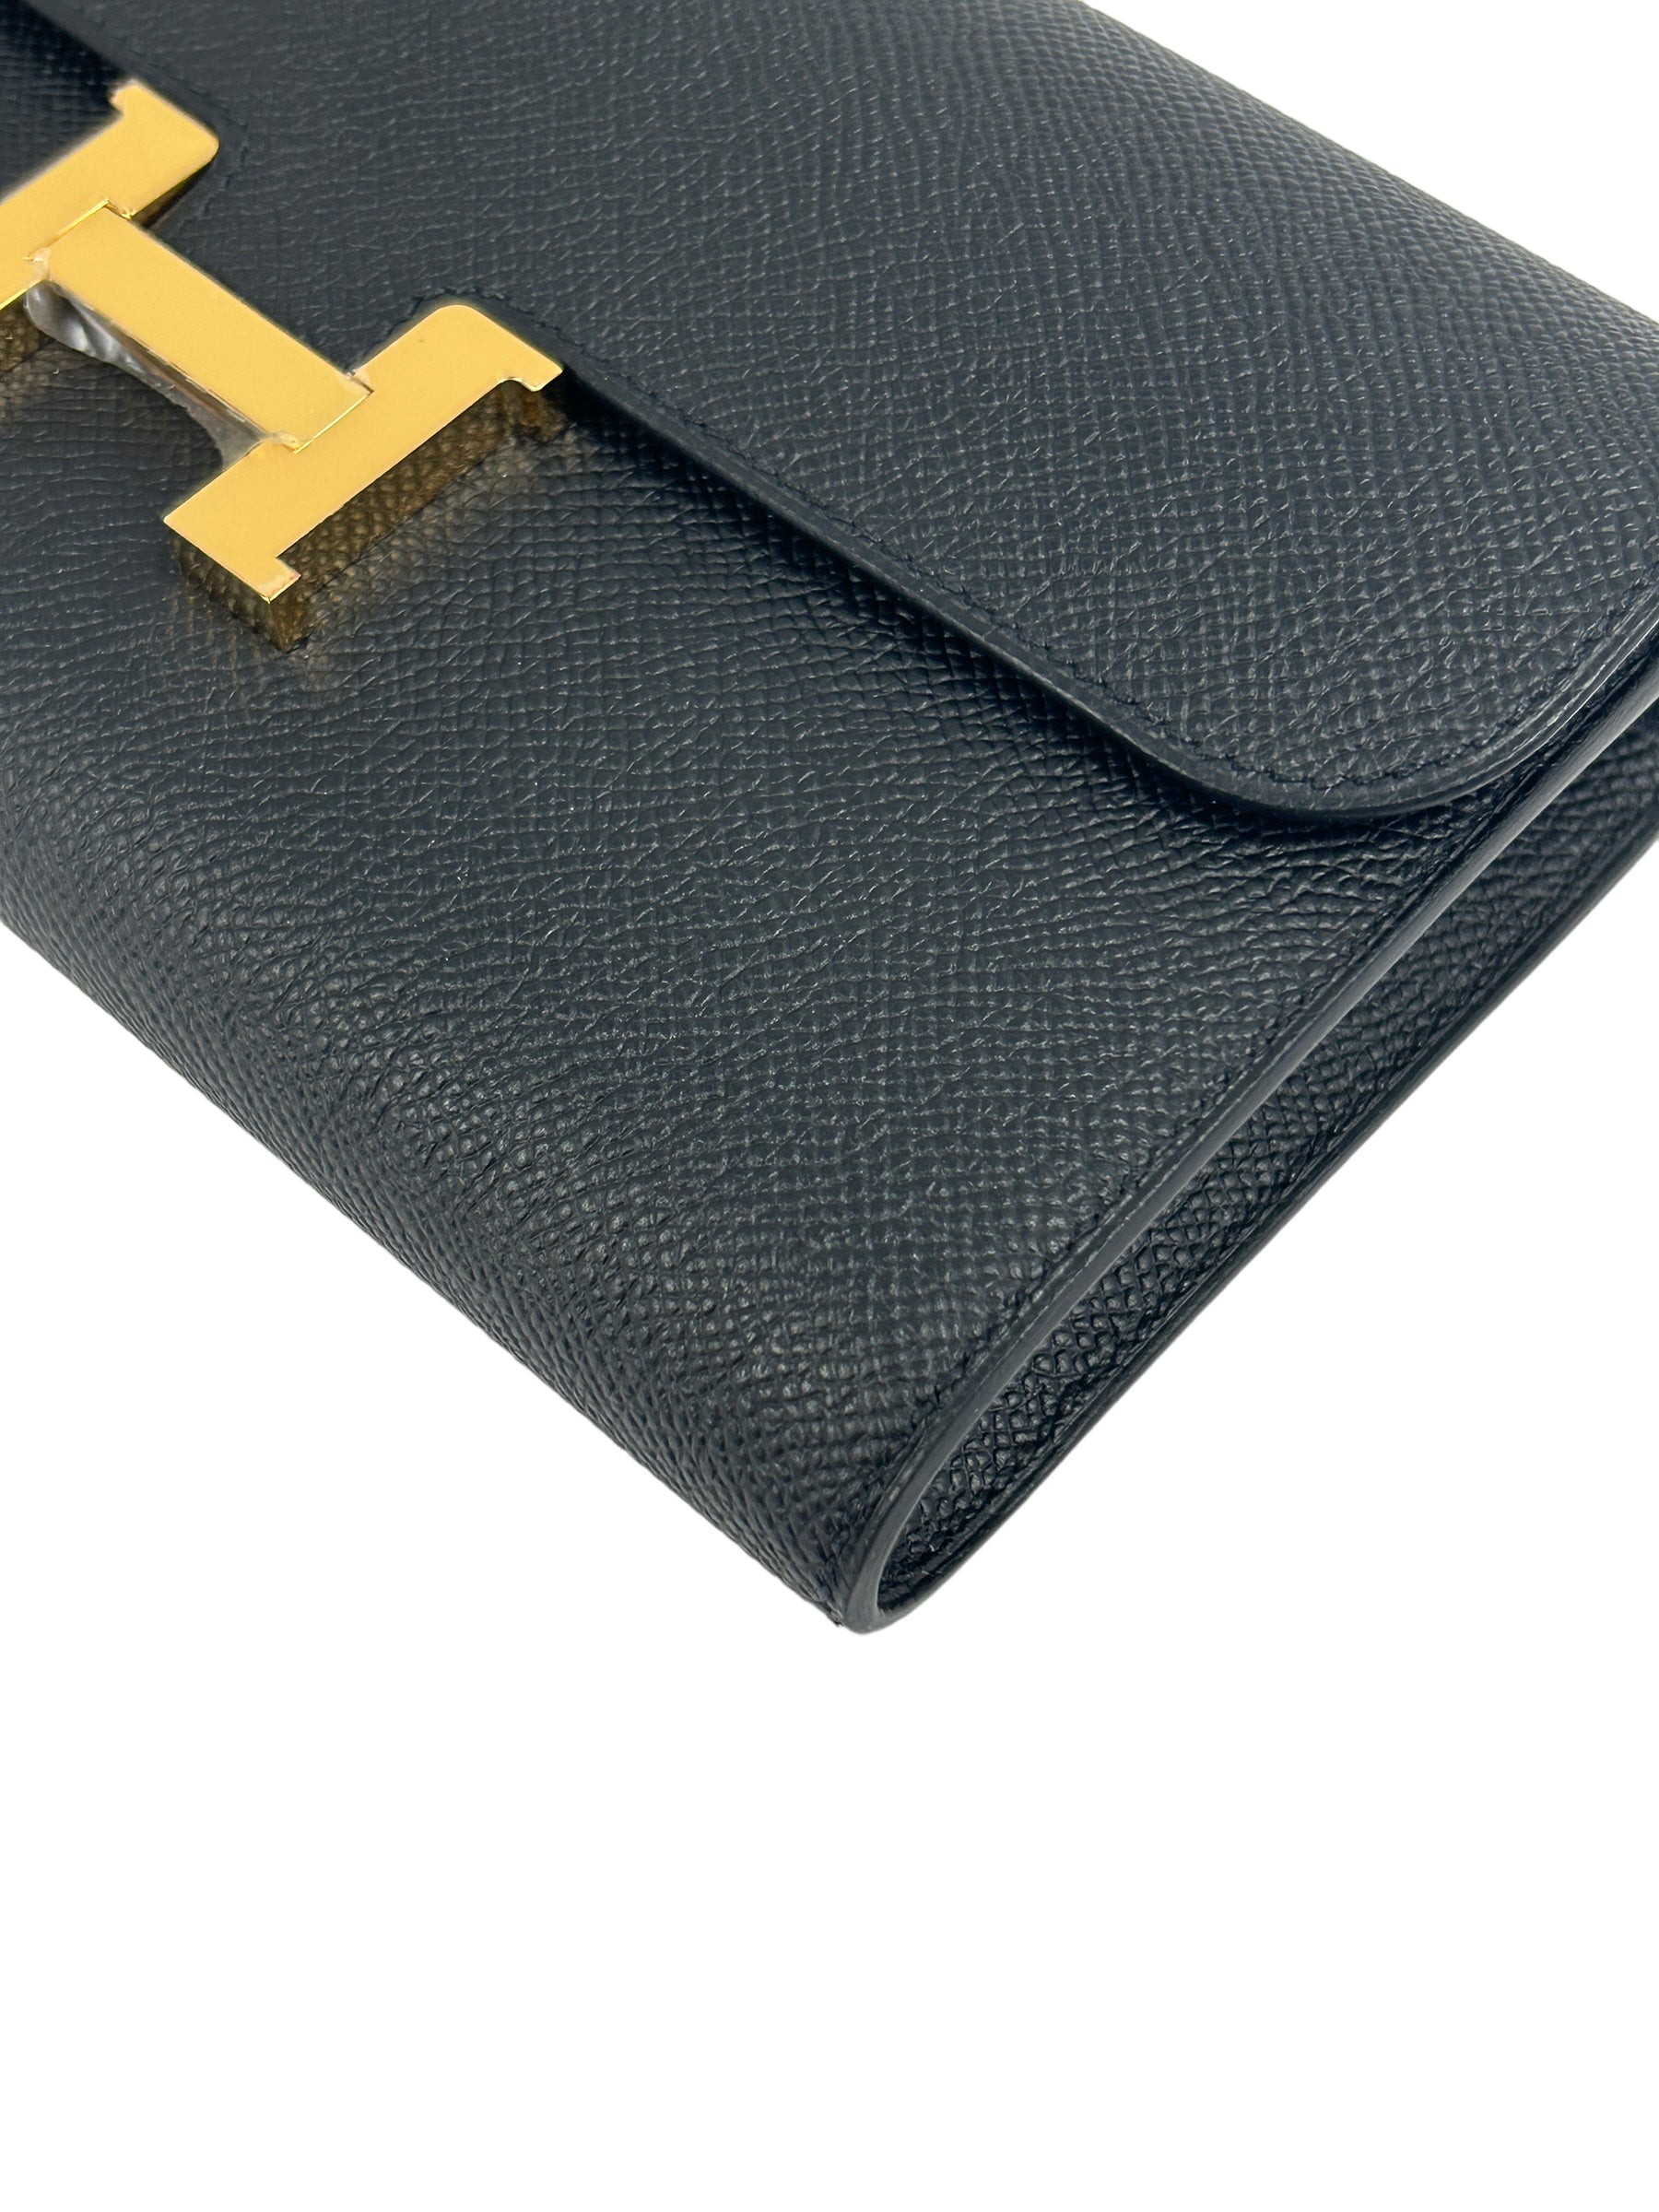 Black Epsom Constance To Go Wallet W/GHW